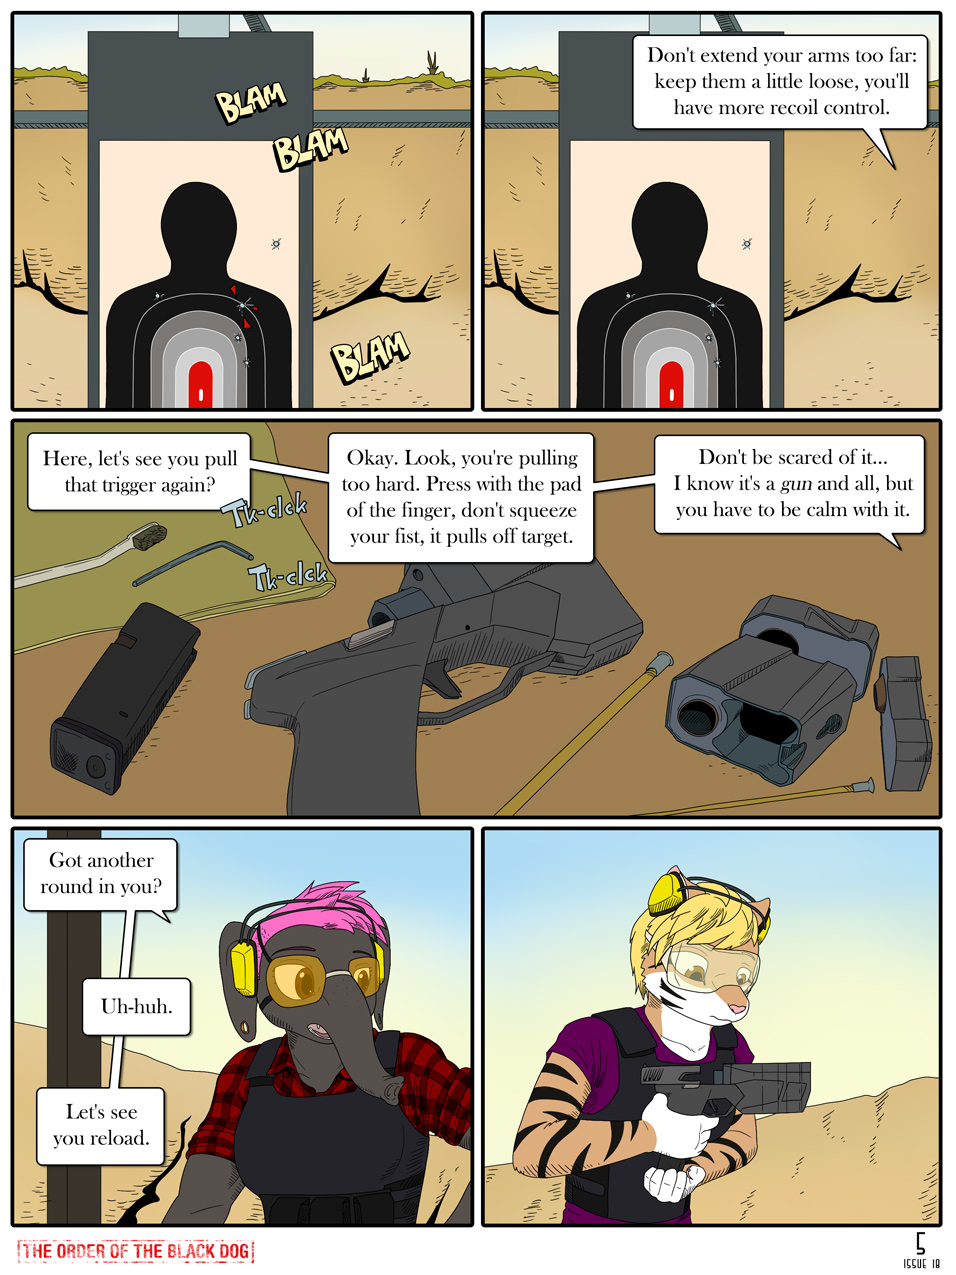 Issue 18, Page 5